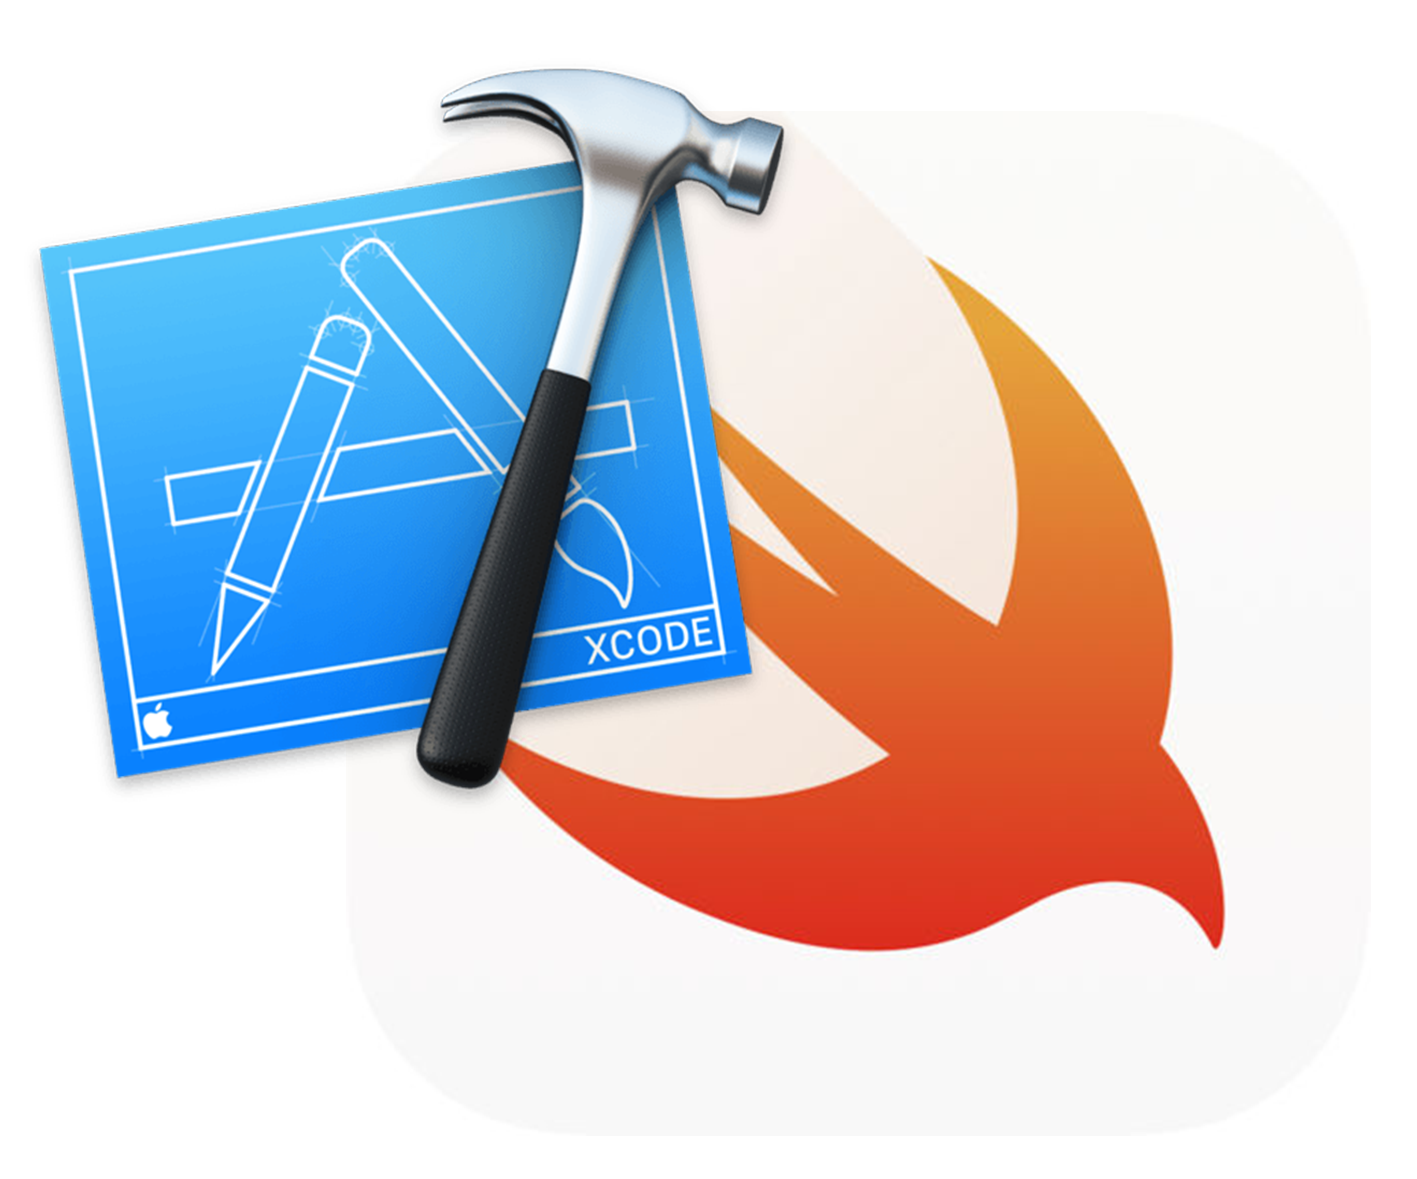 Xcode and Swift